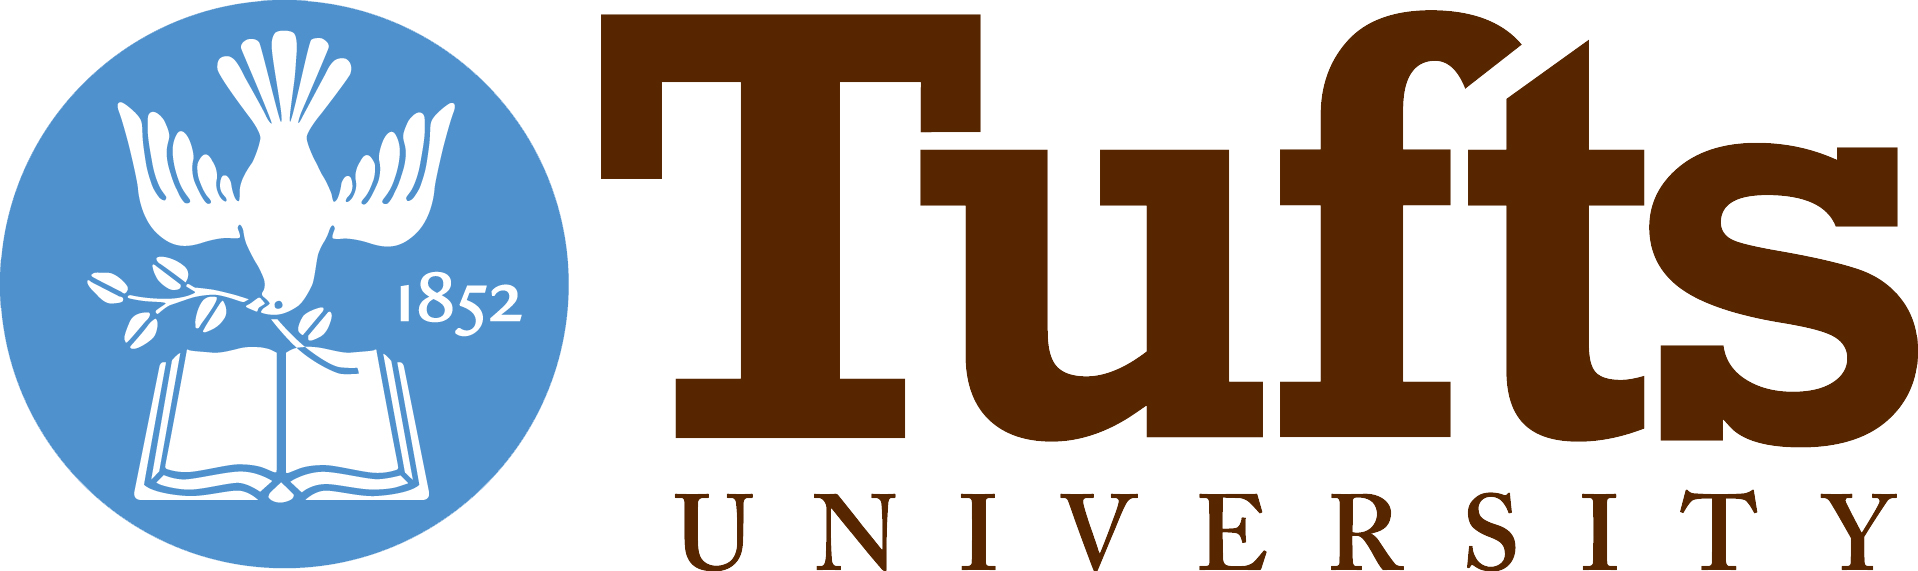 Tufts University - Online Giving